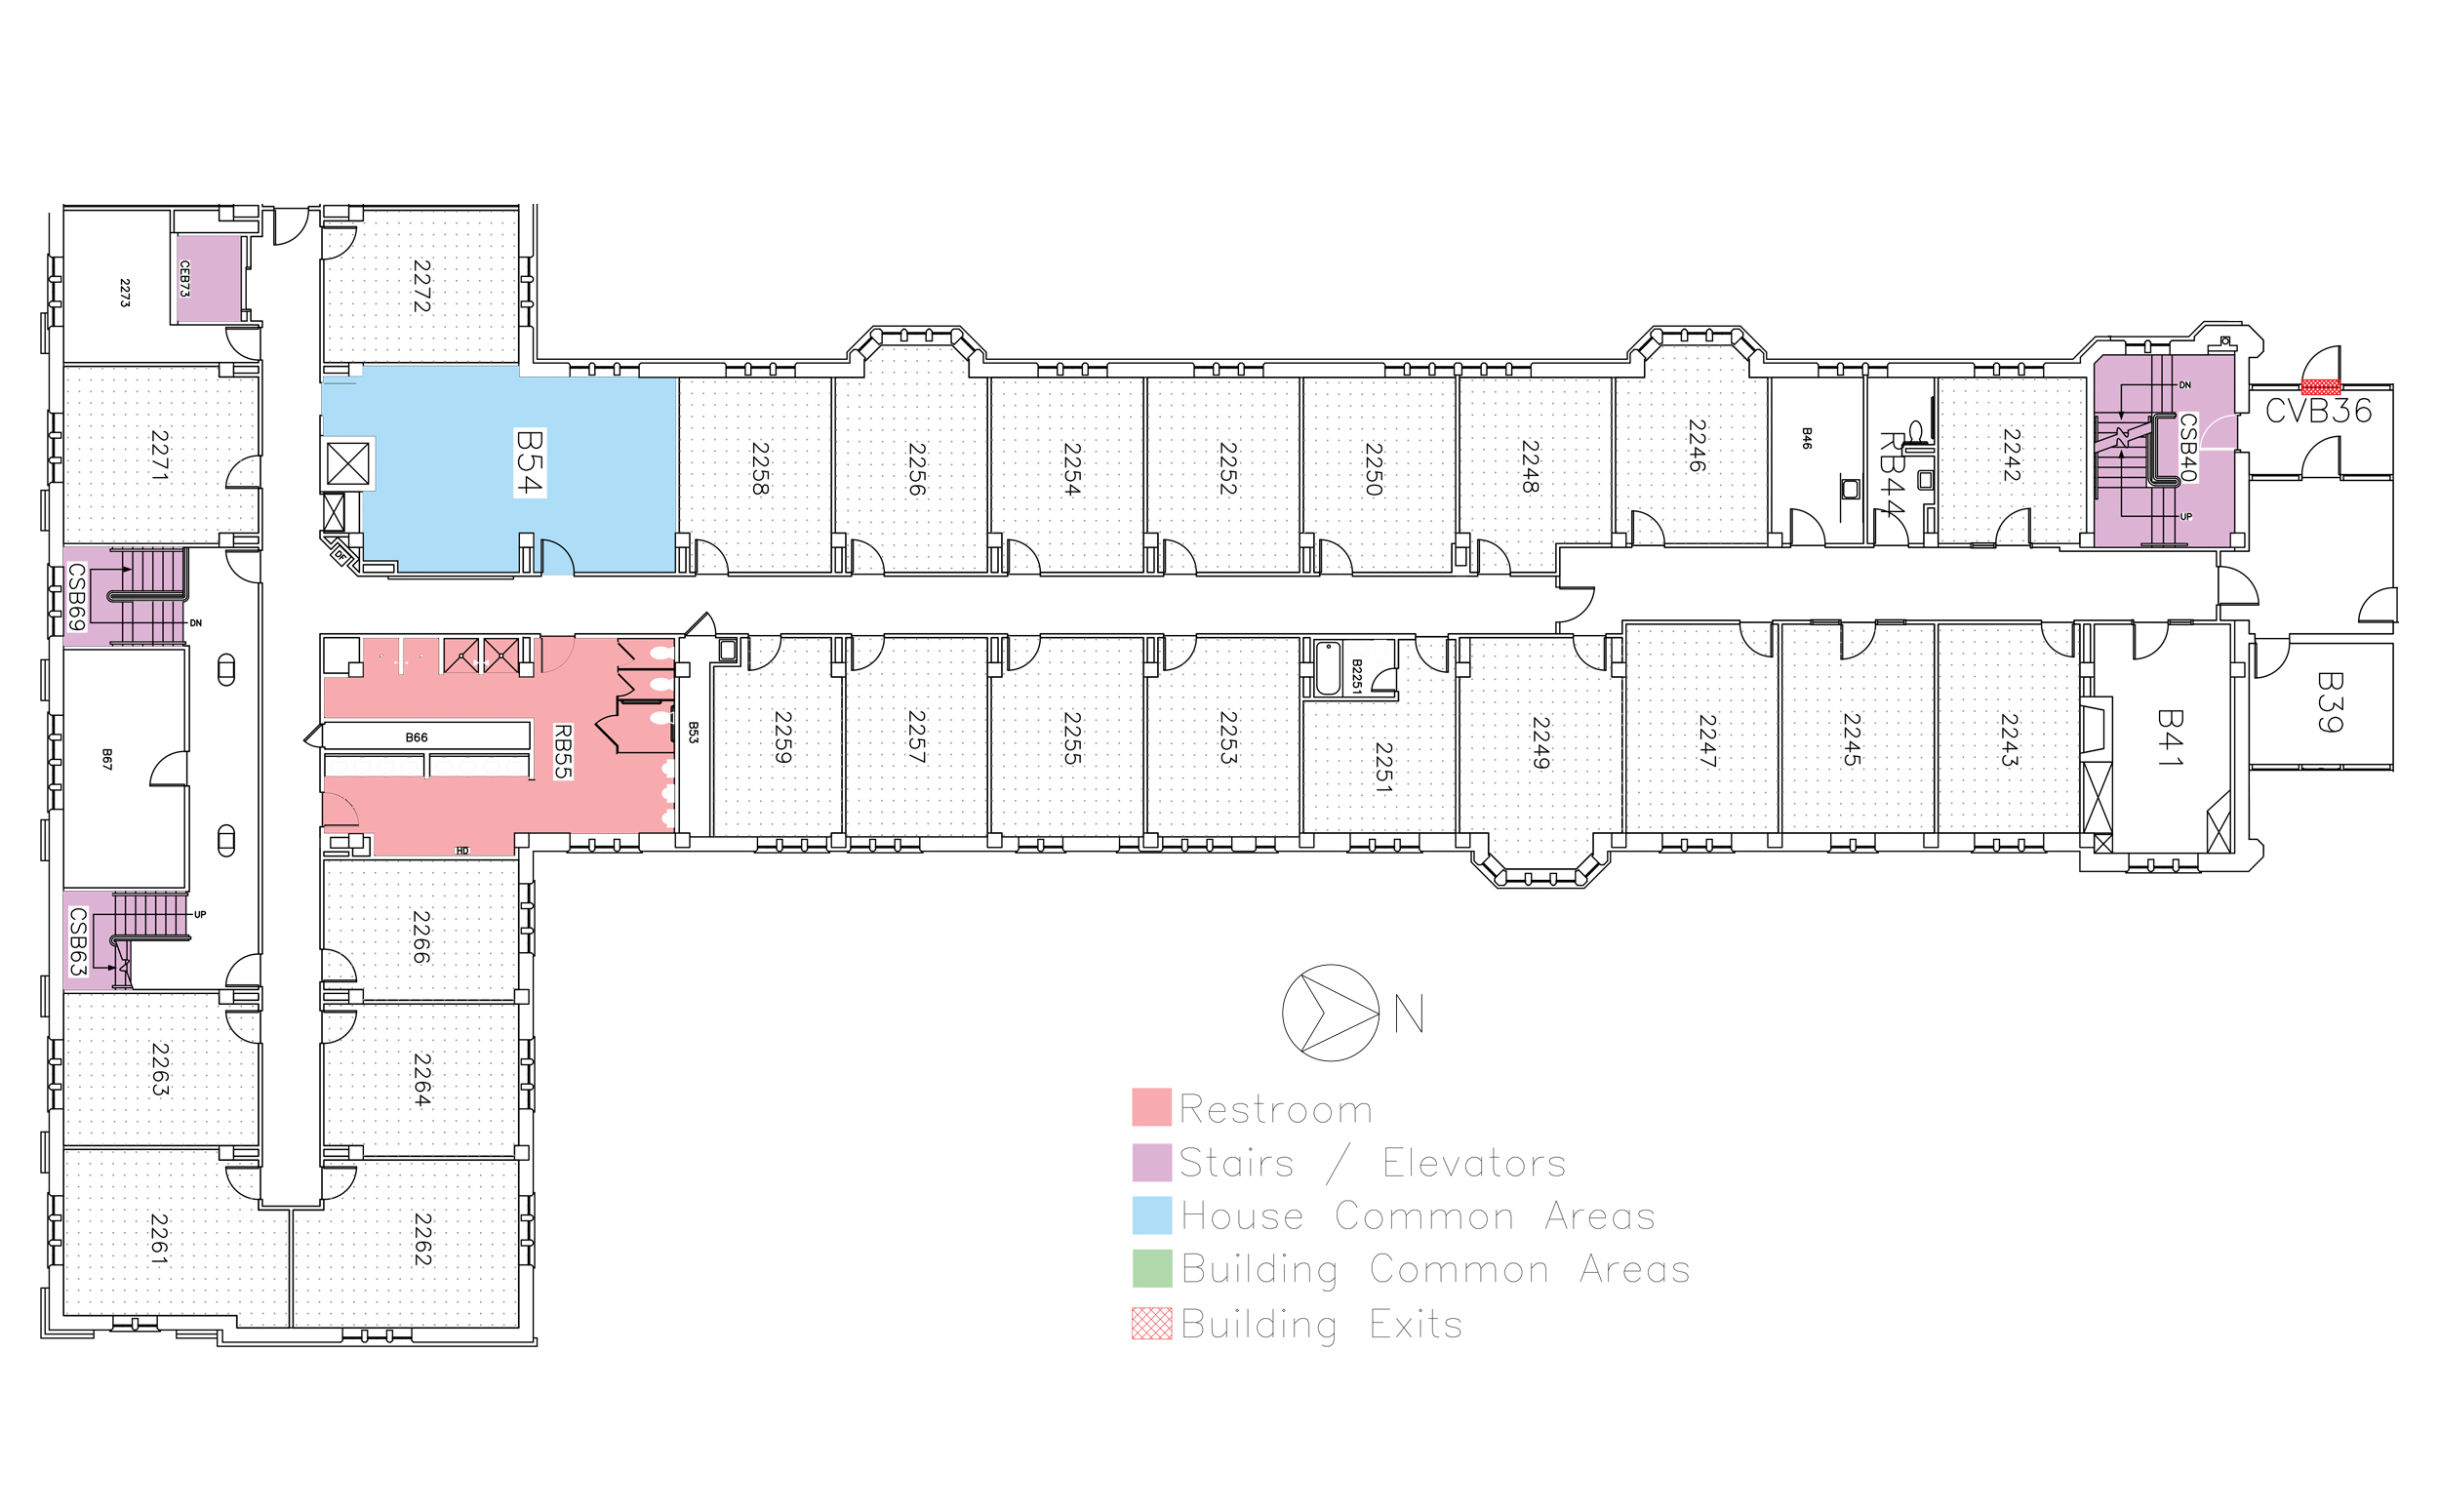 Godfrey House, second floor in Friley Hall floor plan. Identifies the location of rooms, bathrooms and common space.